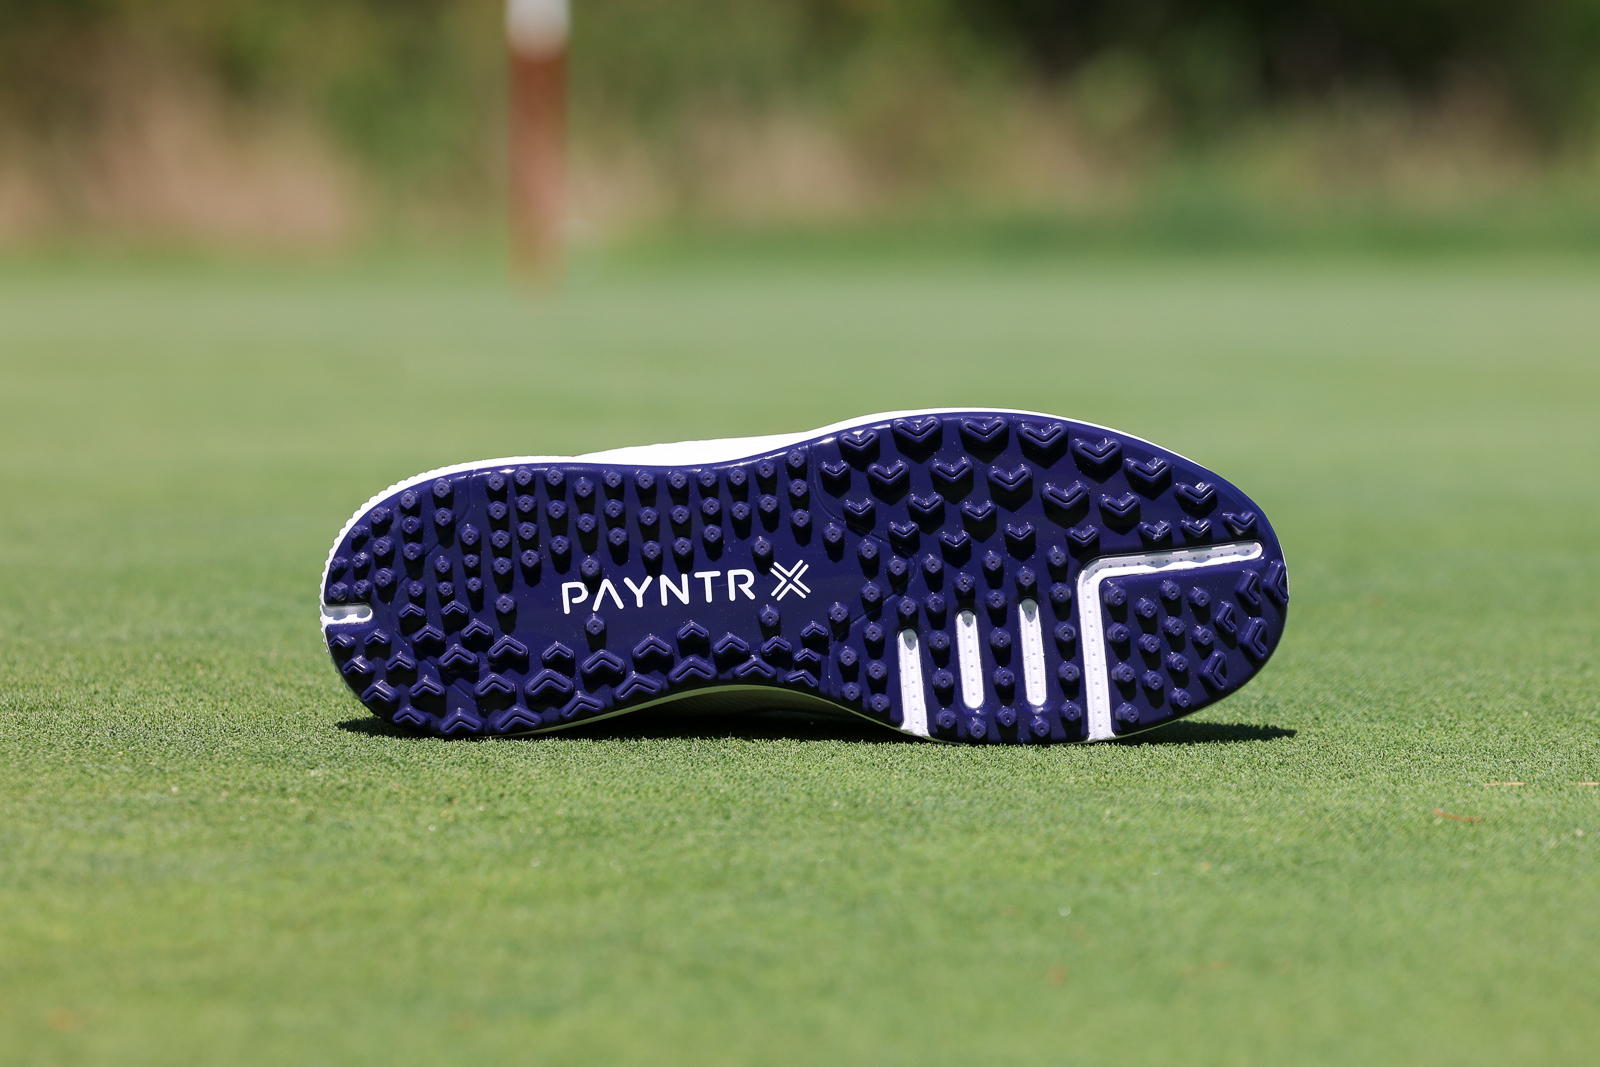 Payntr Golf Shoes Sole